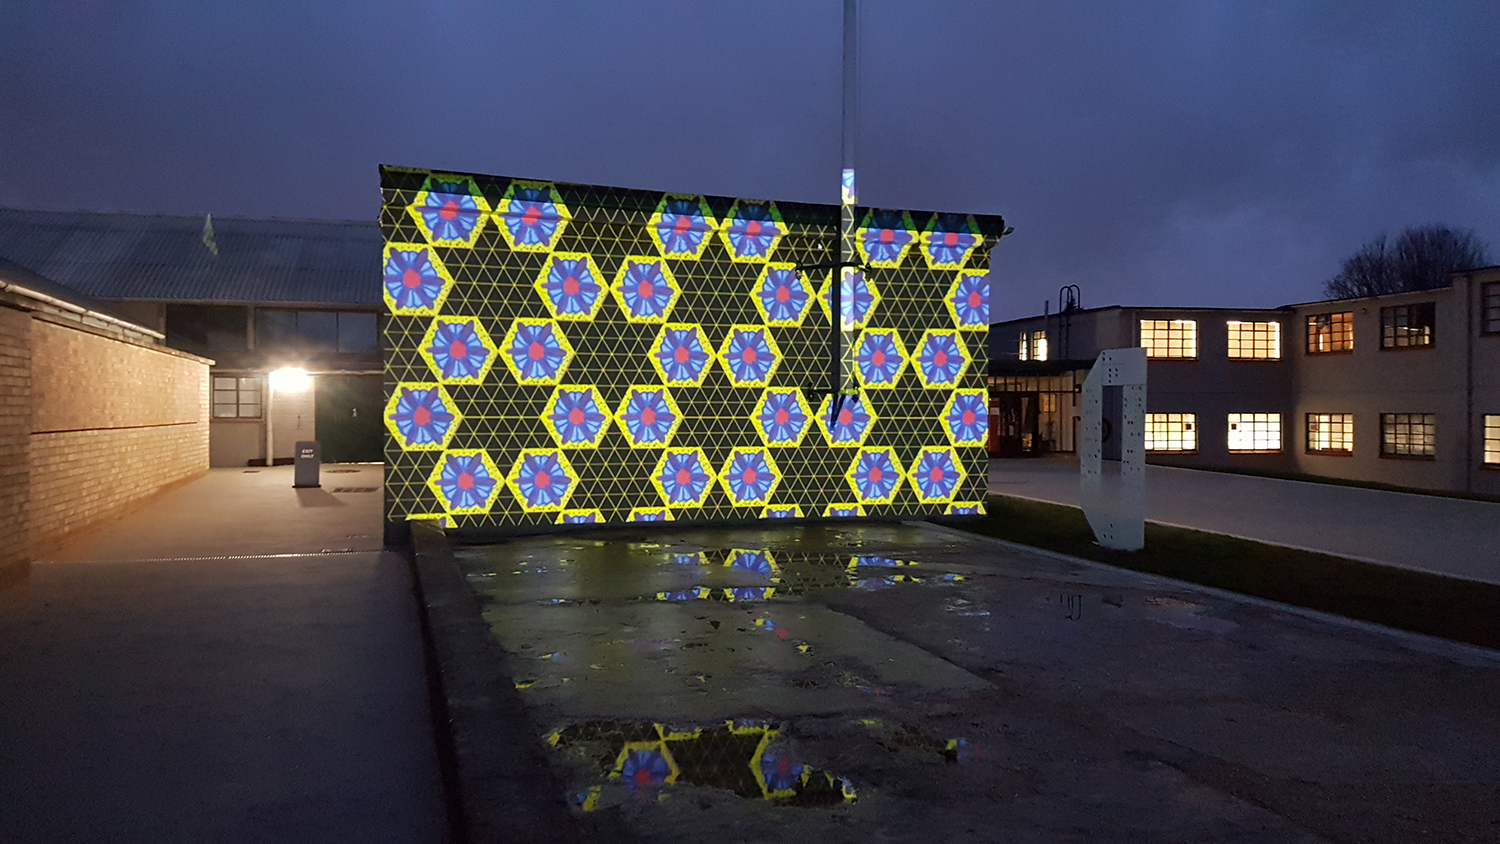 Installation view: Between the Stars, Bletchley Park, 2020. Photo: Pete Cleary.